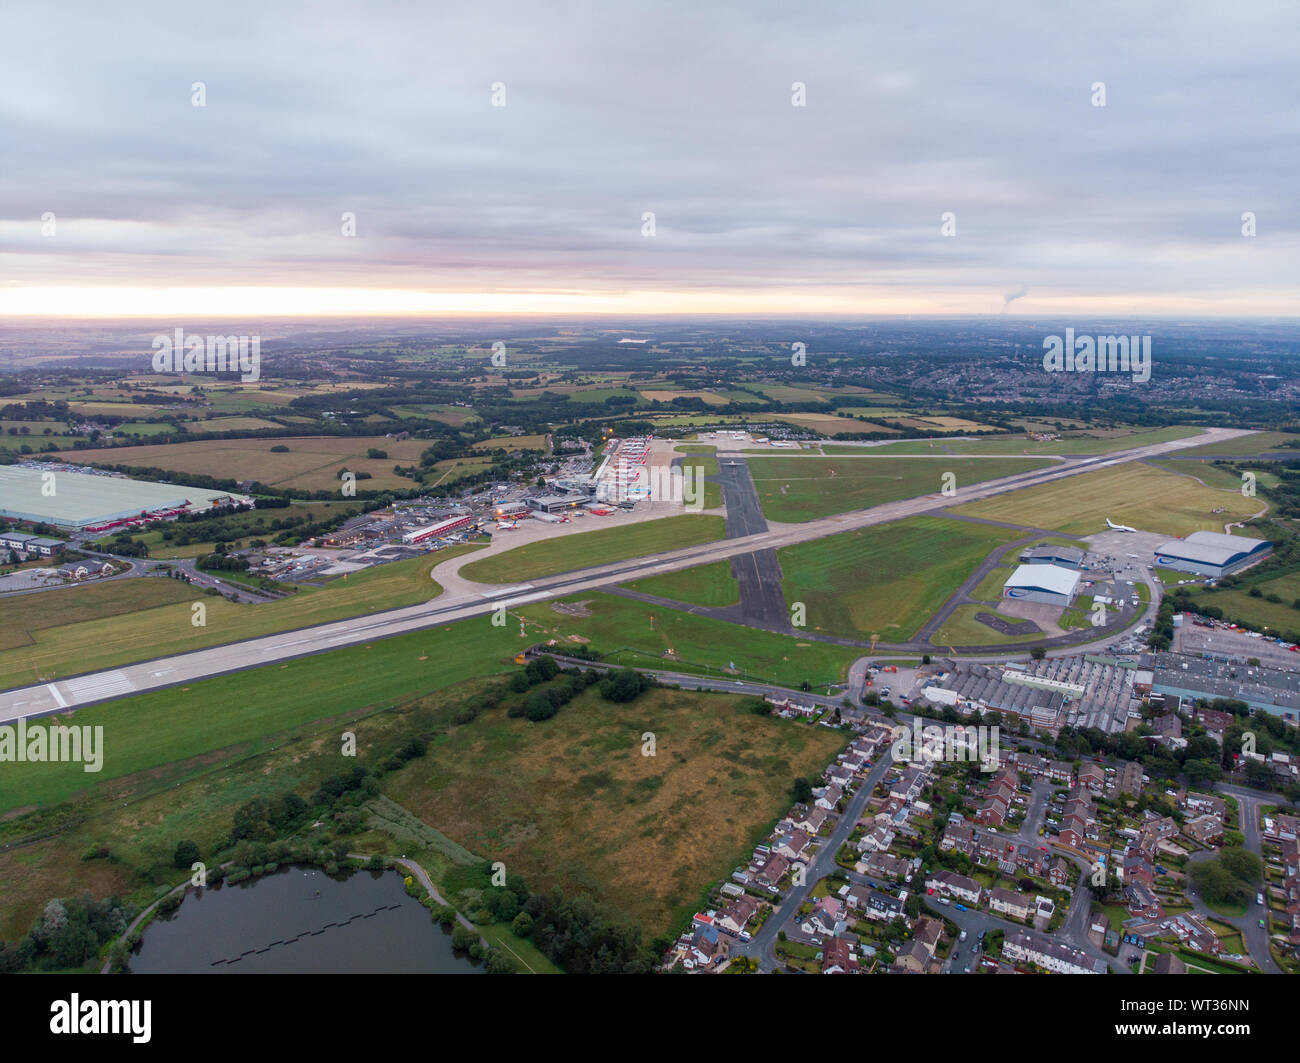 Aerial photo of the famous Leeds and Bradford airport located in the Yeadon area of West Yorkshire in the UK, typical British airport showing the runw Stock Photo